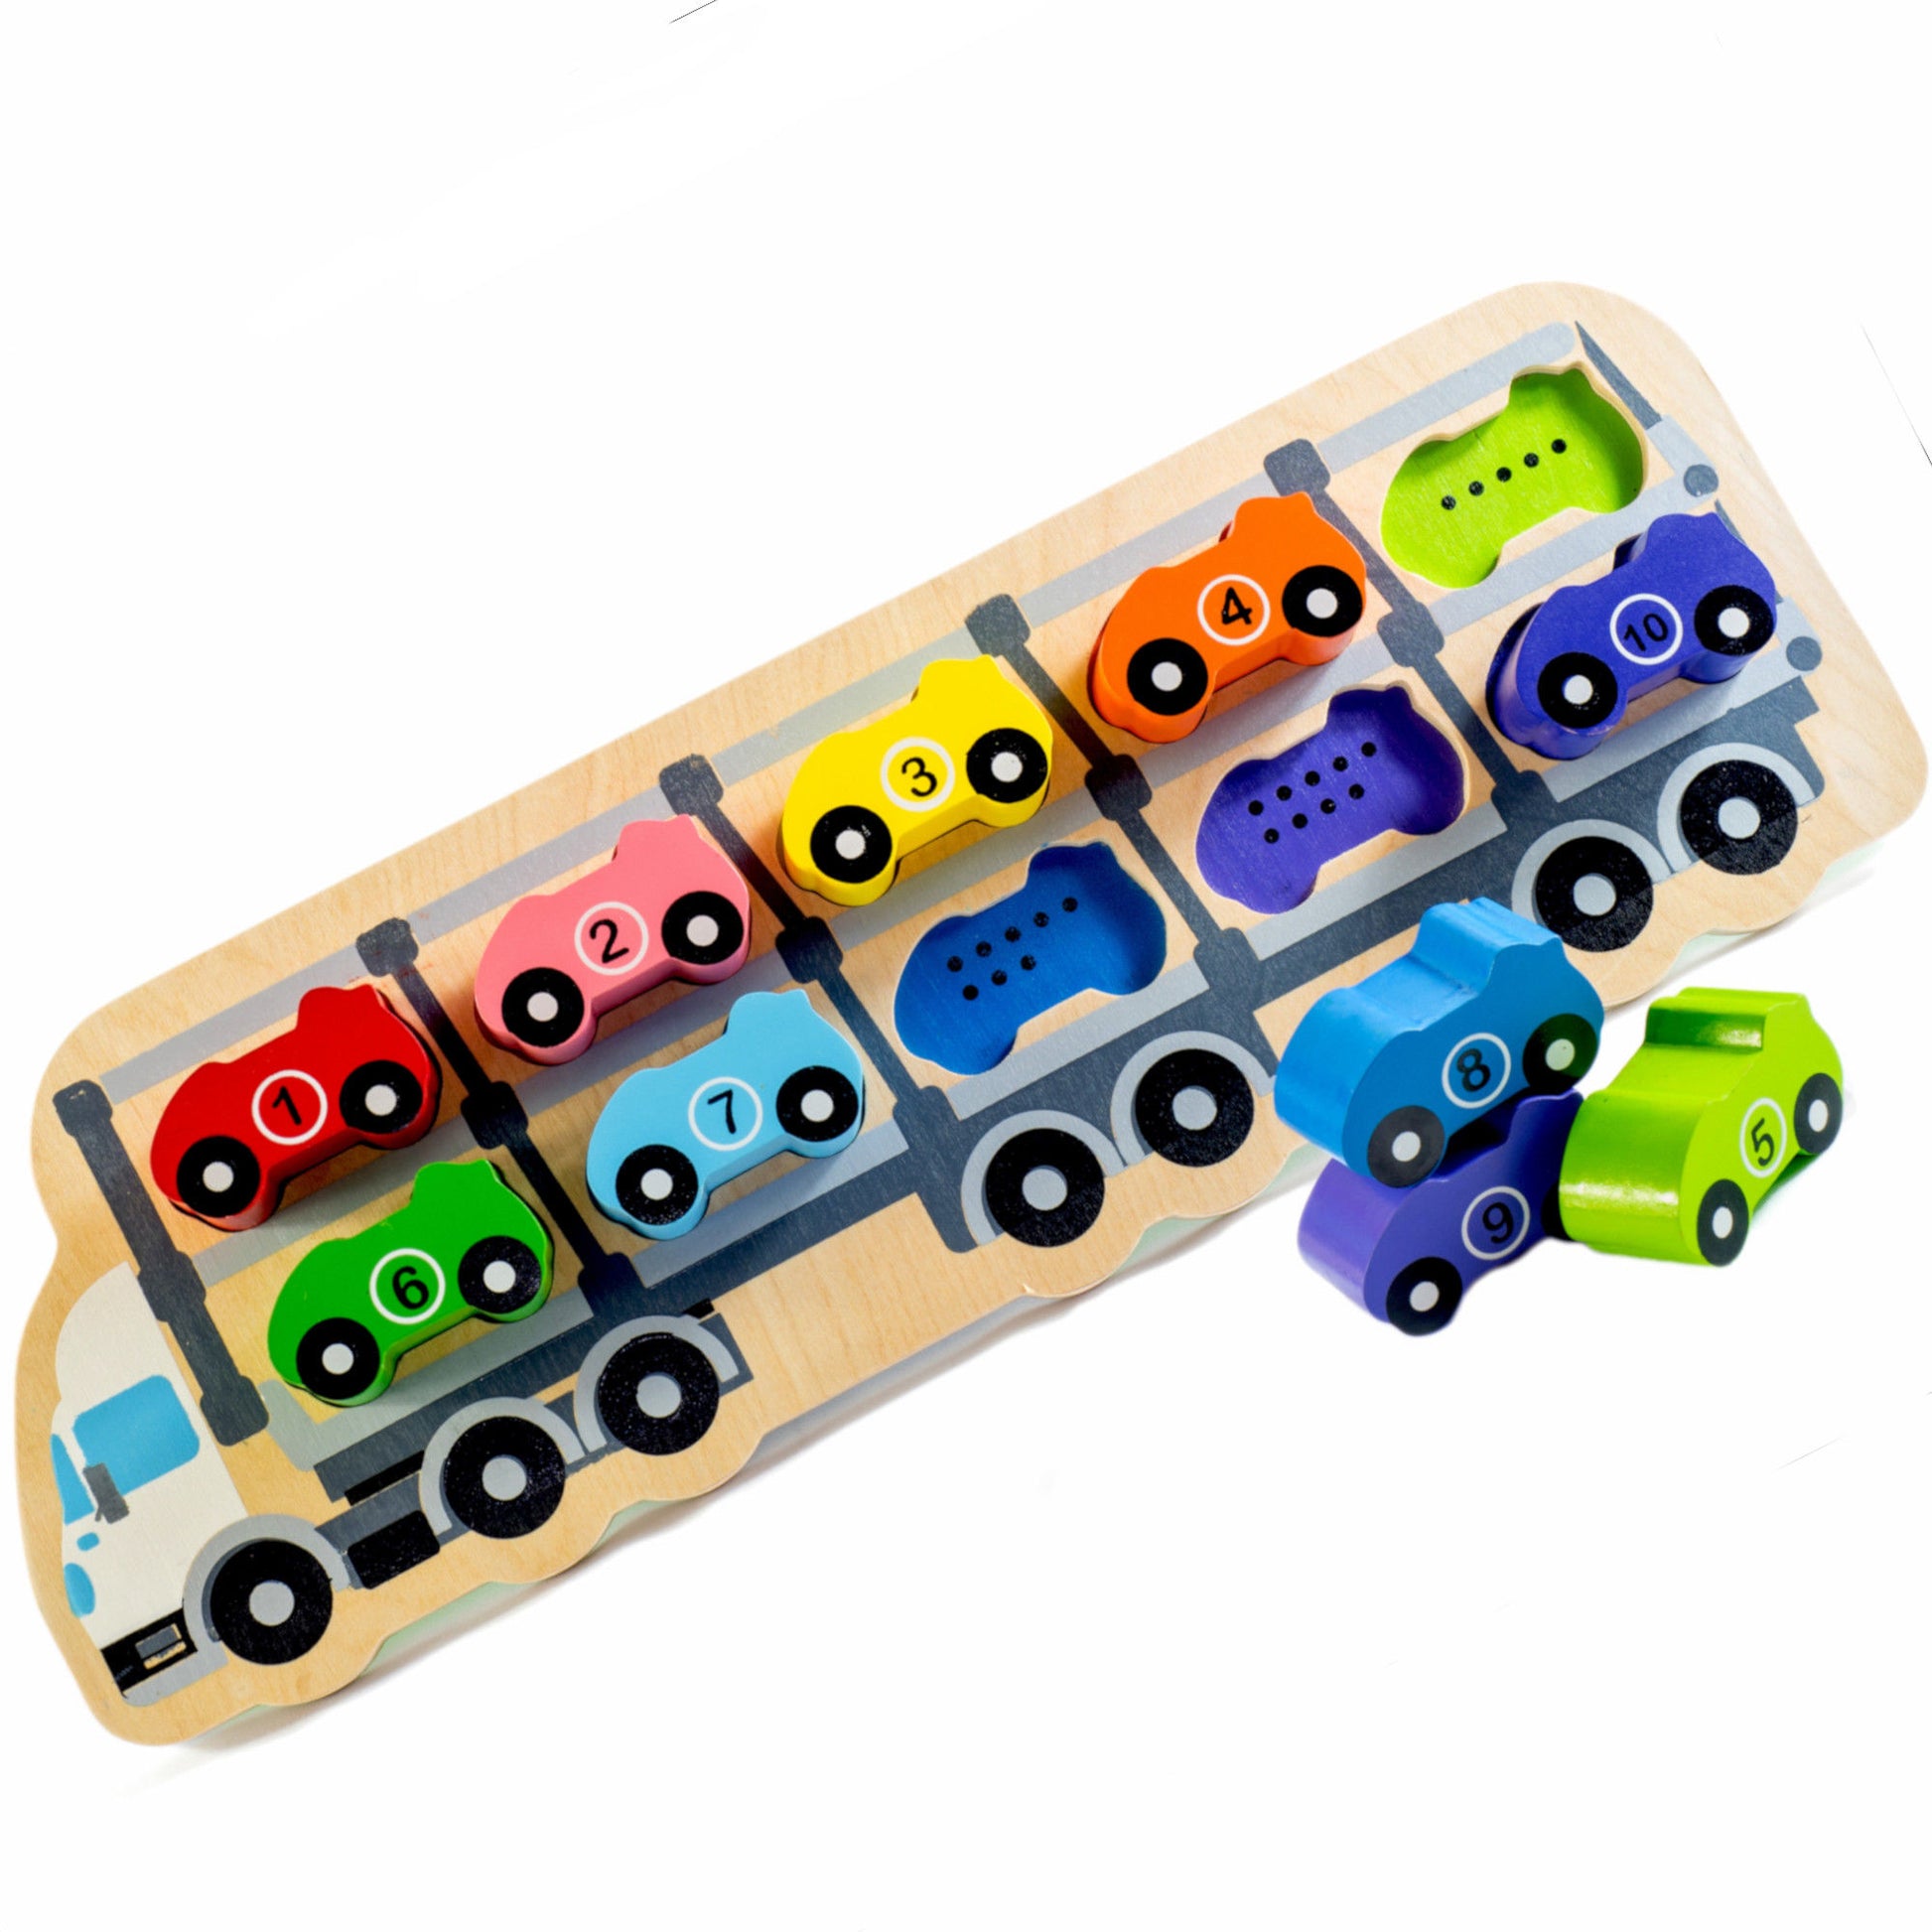 Kiddie Connect Puzzle 1 – 10 Car Wooden